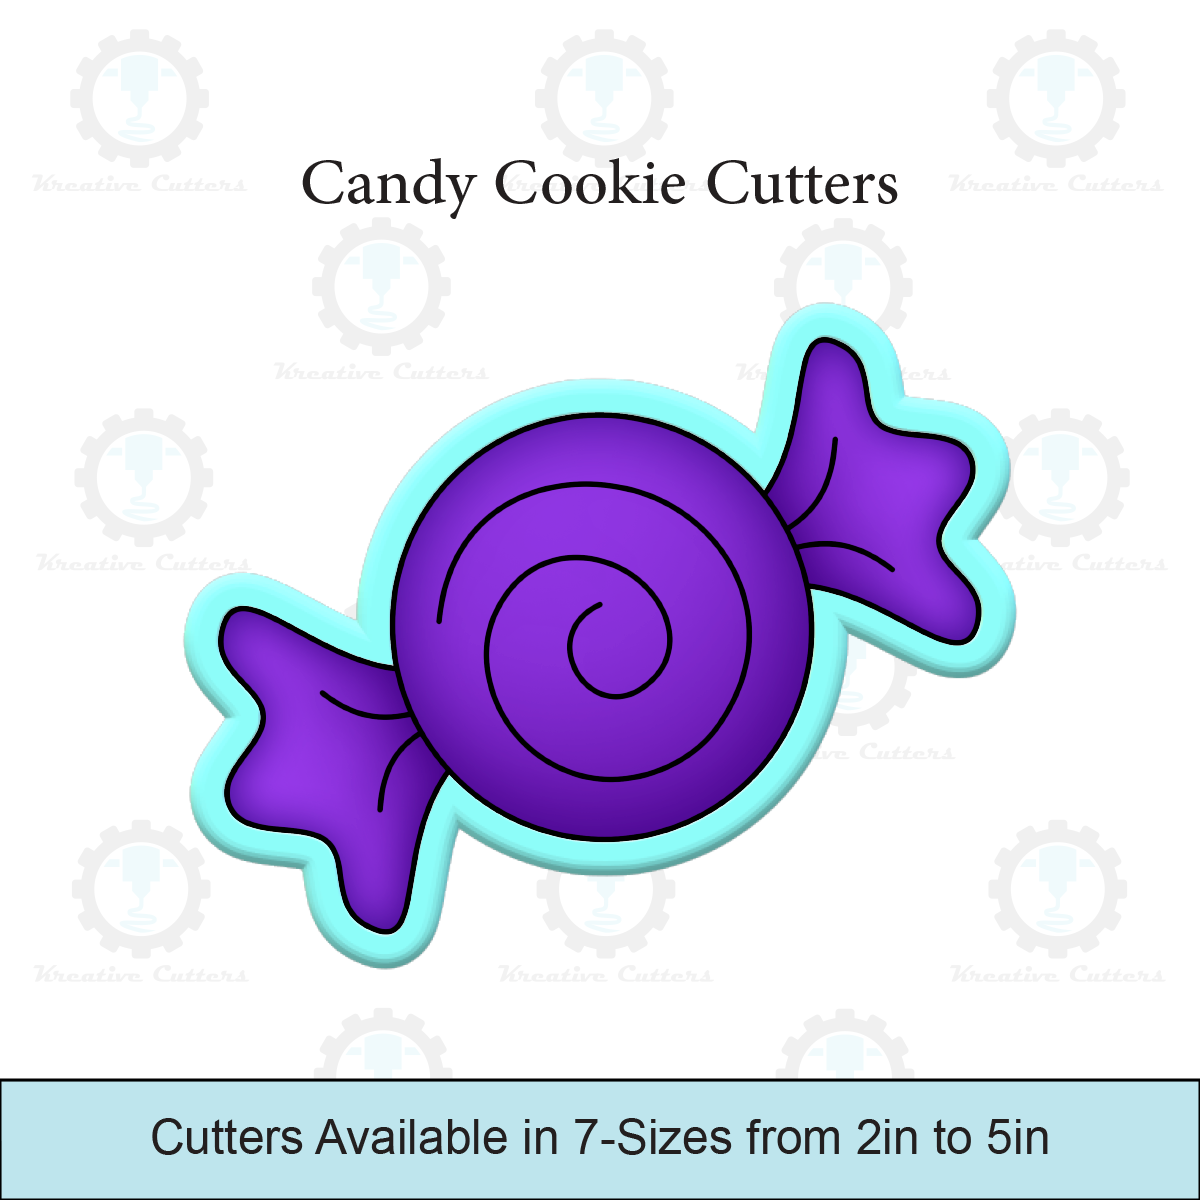 Candy Cookie Cutters